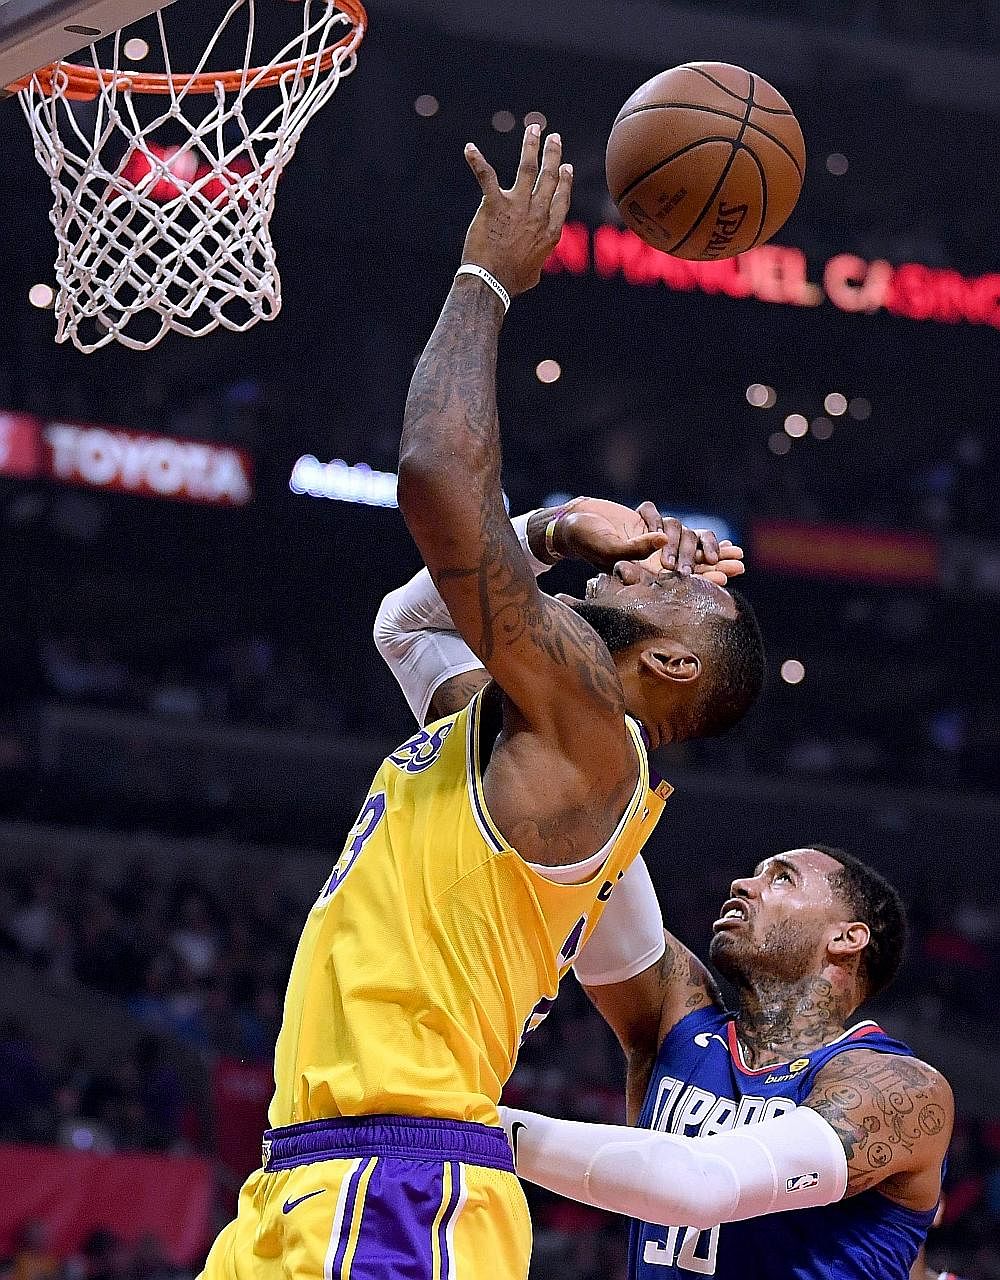 LeBron James being fouled by the Clippers' Mike Scott in the first half at Staples Centre on Thursday. The Los Angeles Lakers forward made a triumphant return after 36 days on the sidelines, leading his team to a 123-120 overtime win over the Clipper